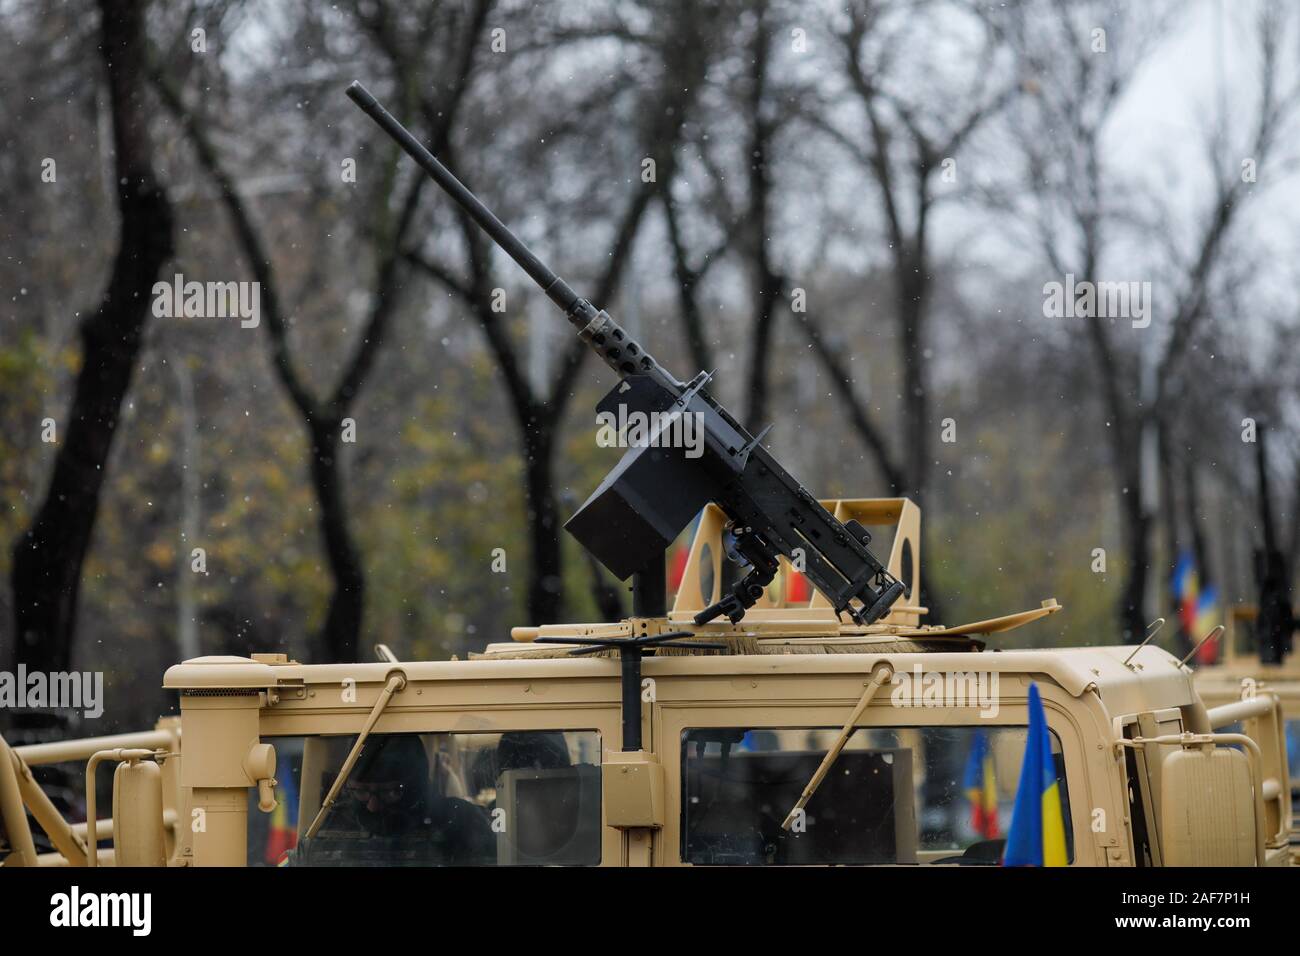 Bucharest, Romania - December 01, 2019: Romanian Army High Mobility Multipurpose Wheeled Vehicle (HMMWV, colloquial Humvee) with 12.7 mm heavy machine Stock Photo